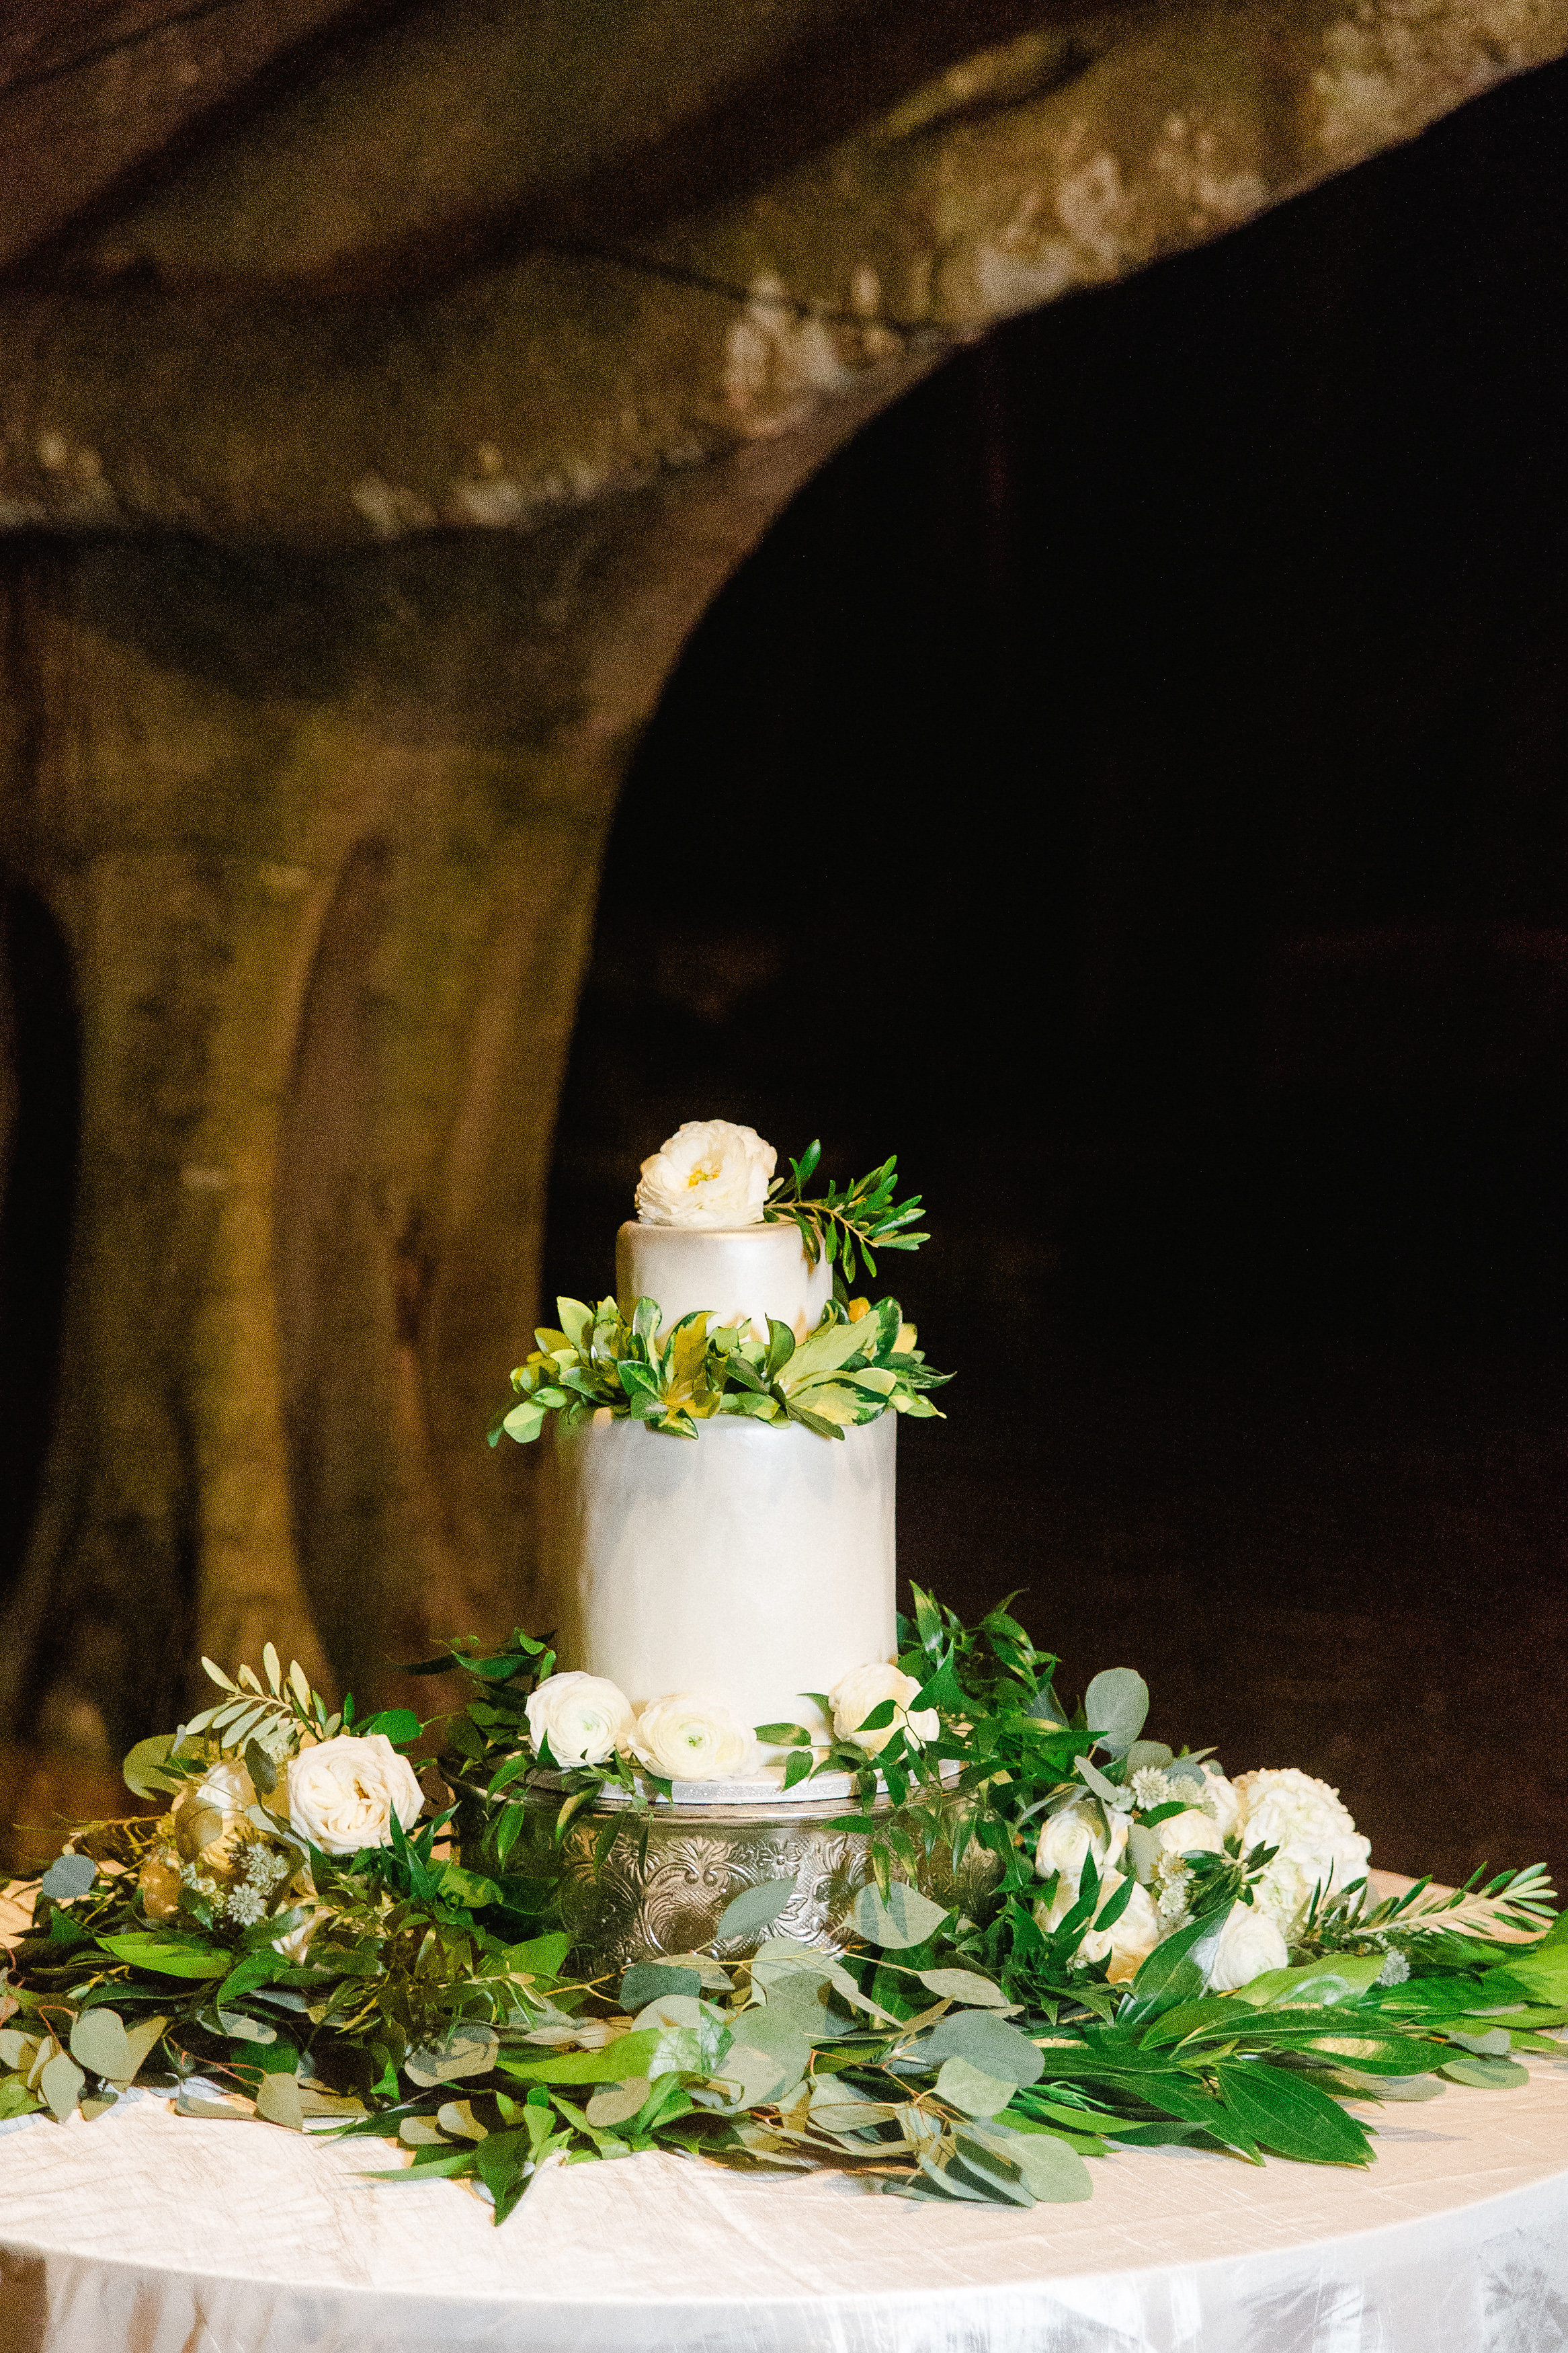 Wedding Cake with a Bed of Greenery